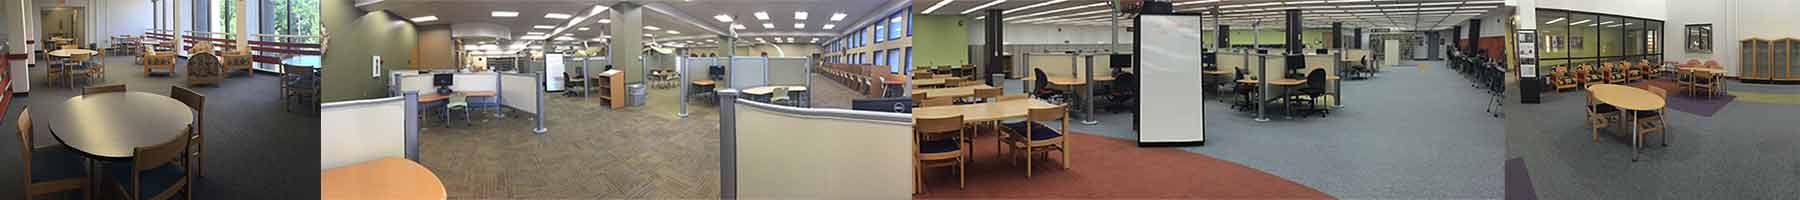 general study areas